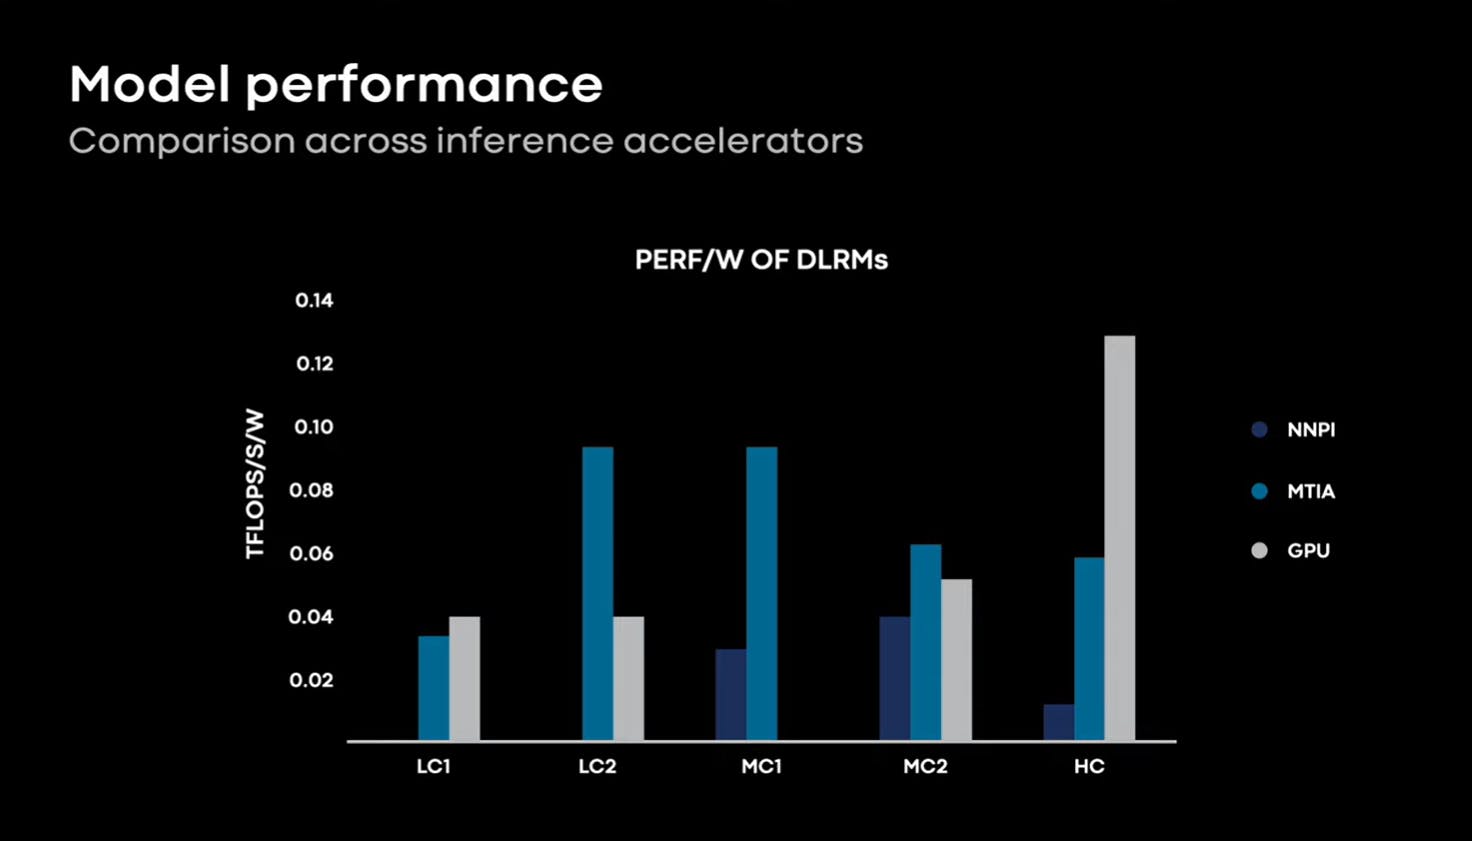 Graph showing model performance